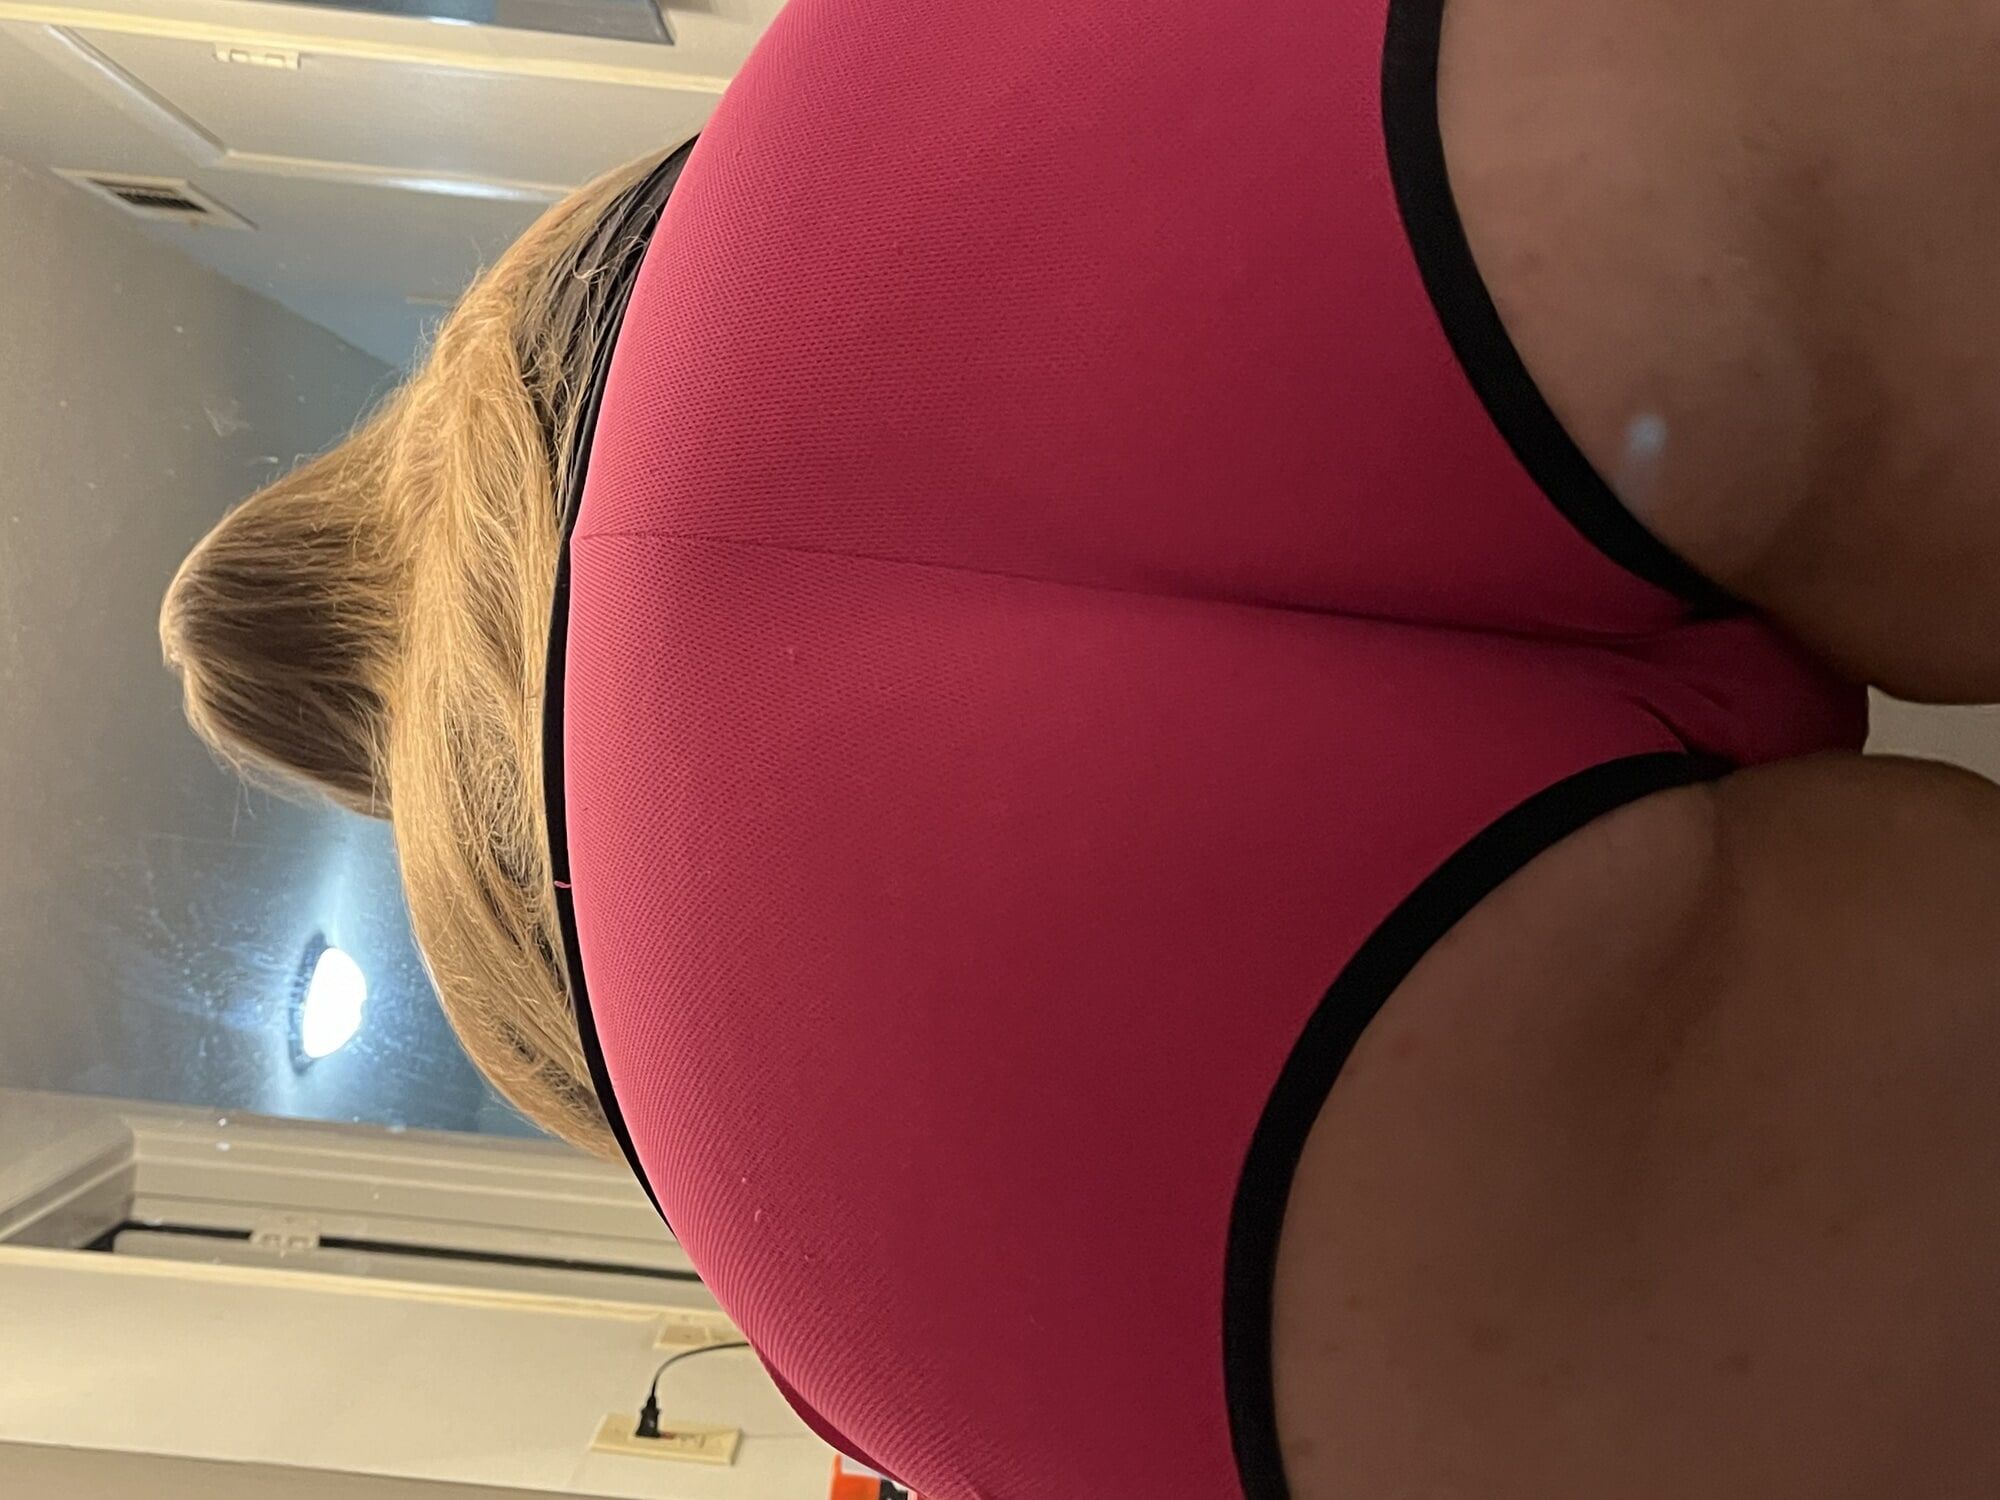 Ass, Legs, and Tits photo shoot - MJ Dawn - Onlyfans #26